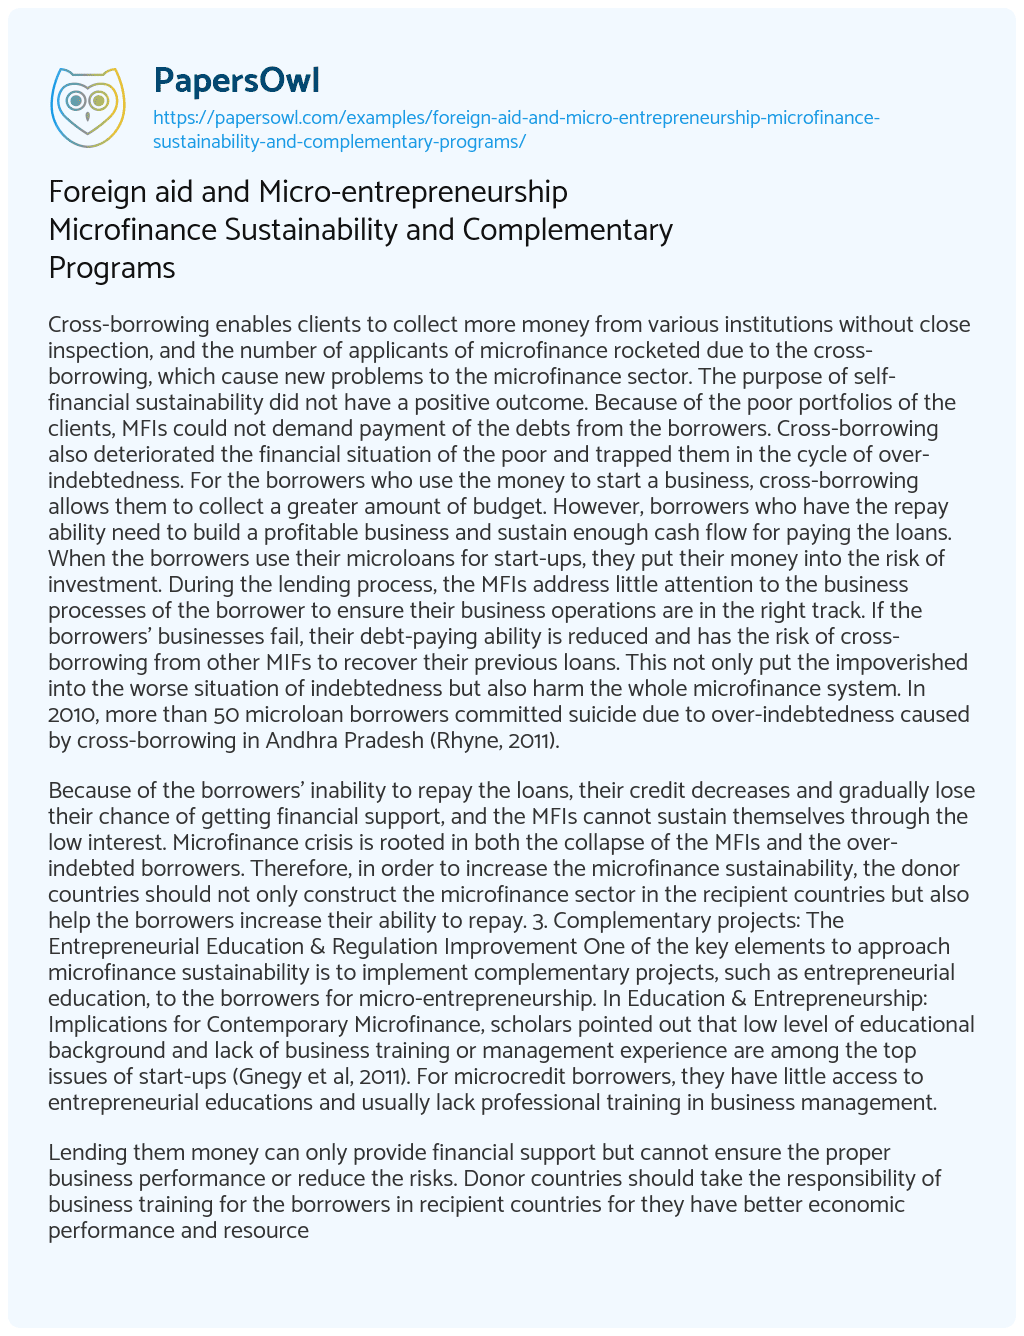 Essay on Foreign Aid and Micro-entrepreneurship Microfinance Sustainability and Complementary Programs